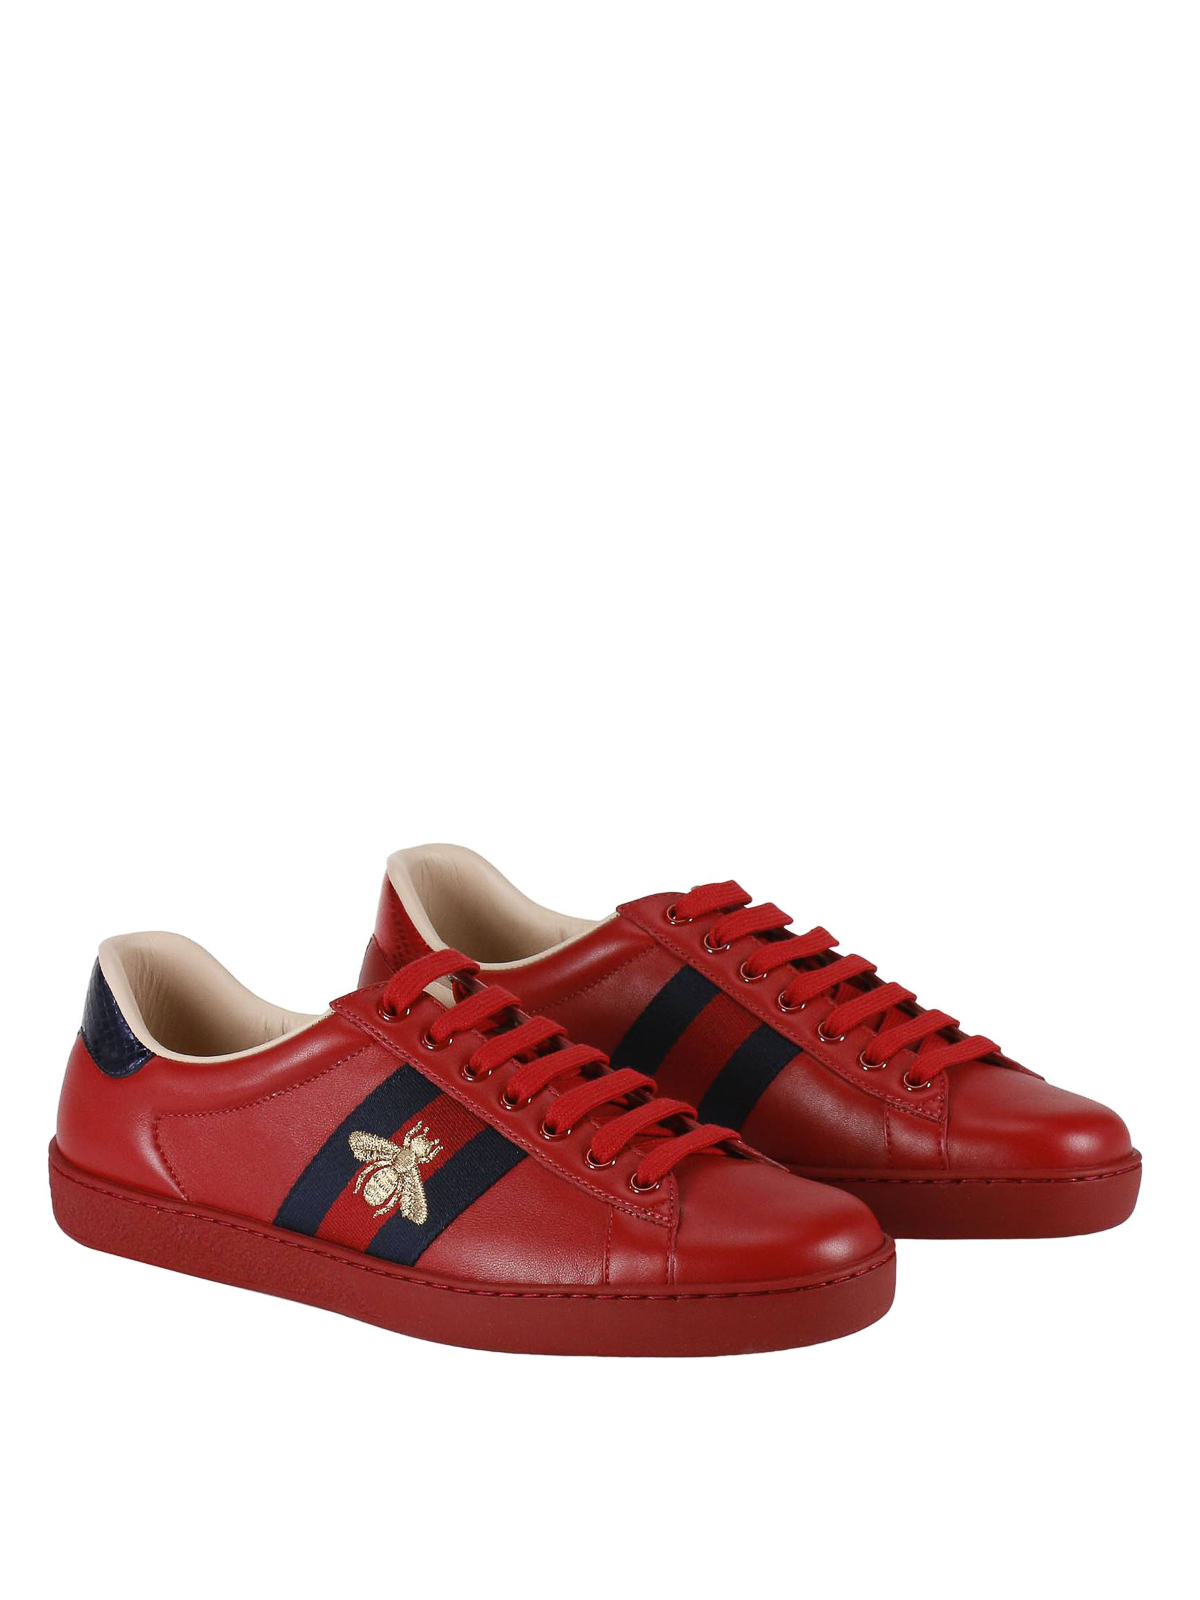 Gucci - Ace Web detail leather sneakers 